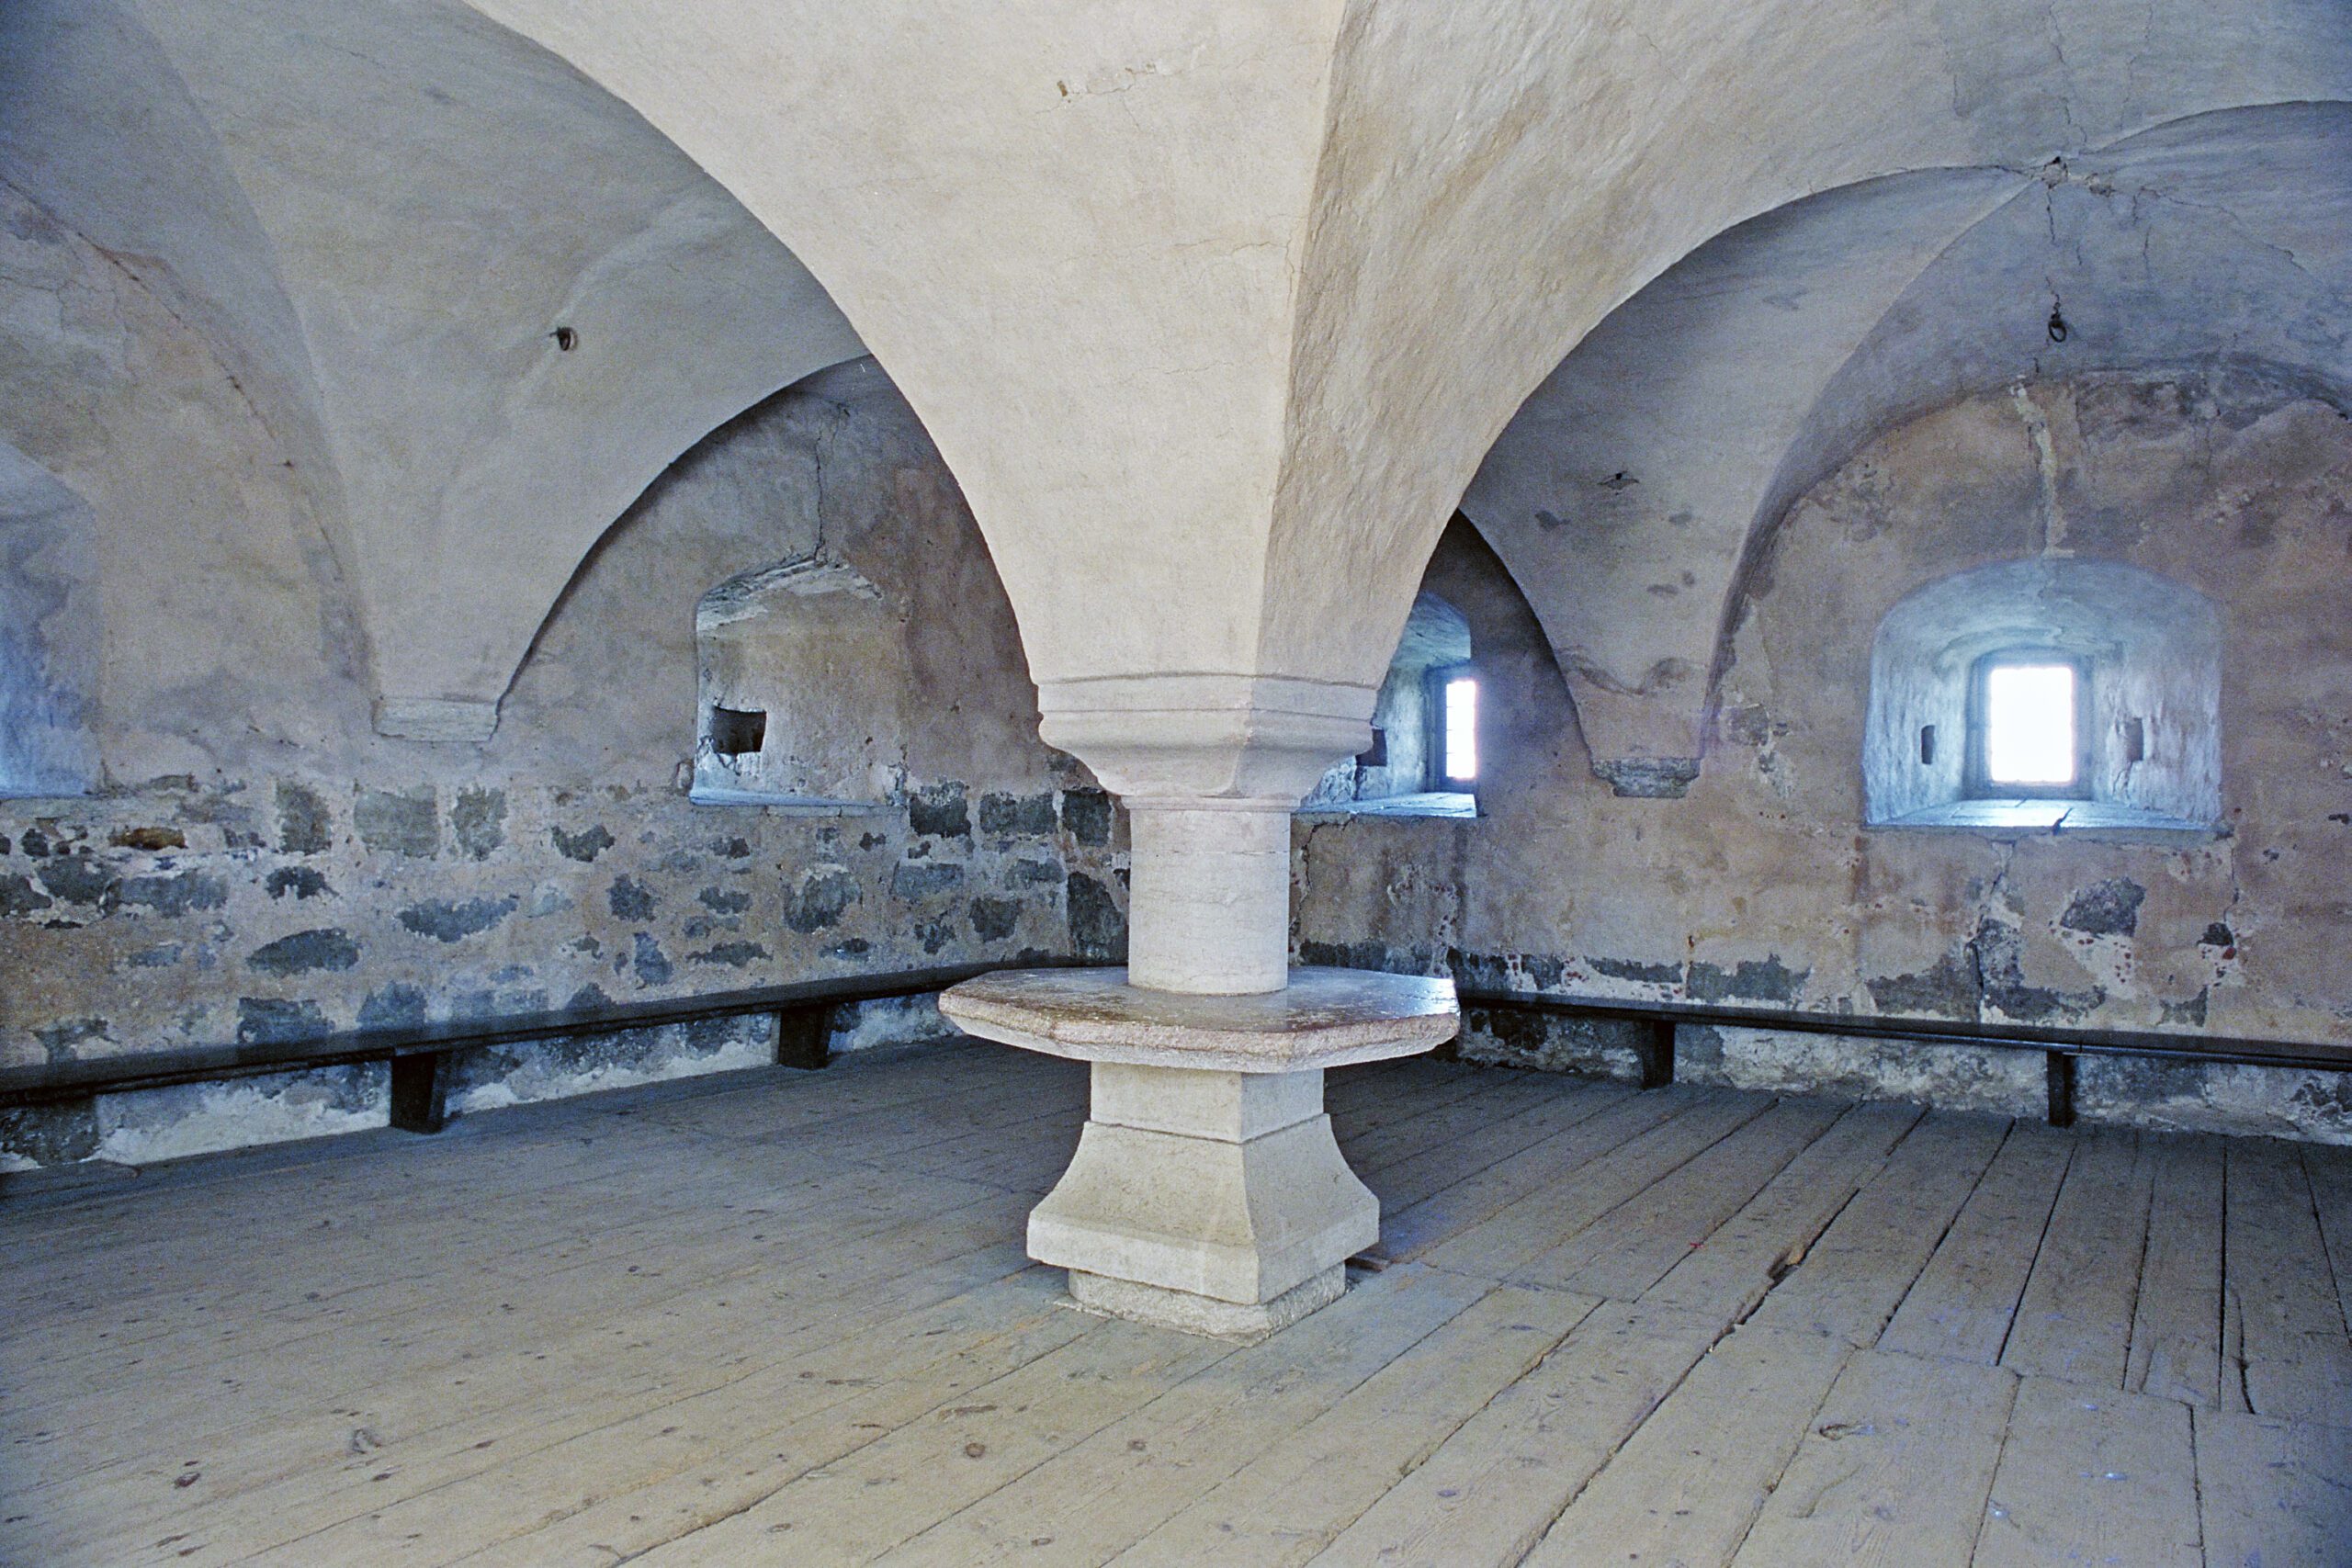 Here, the castle hall is shown, whose vault descends into a pillar with a table top in the middle. Benches run along the walls and the floor is made of wood.